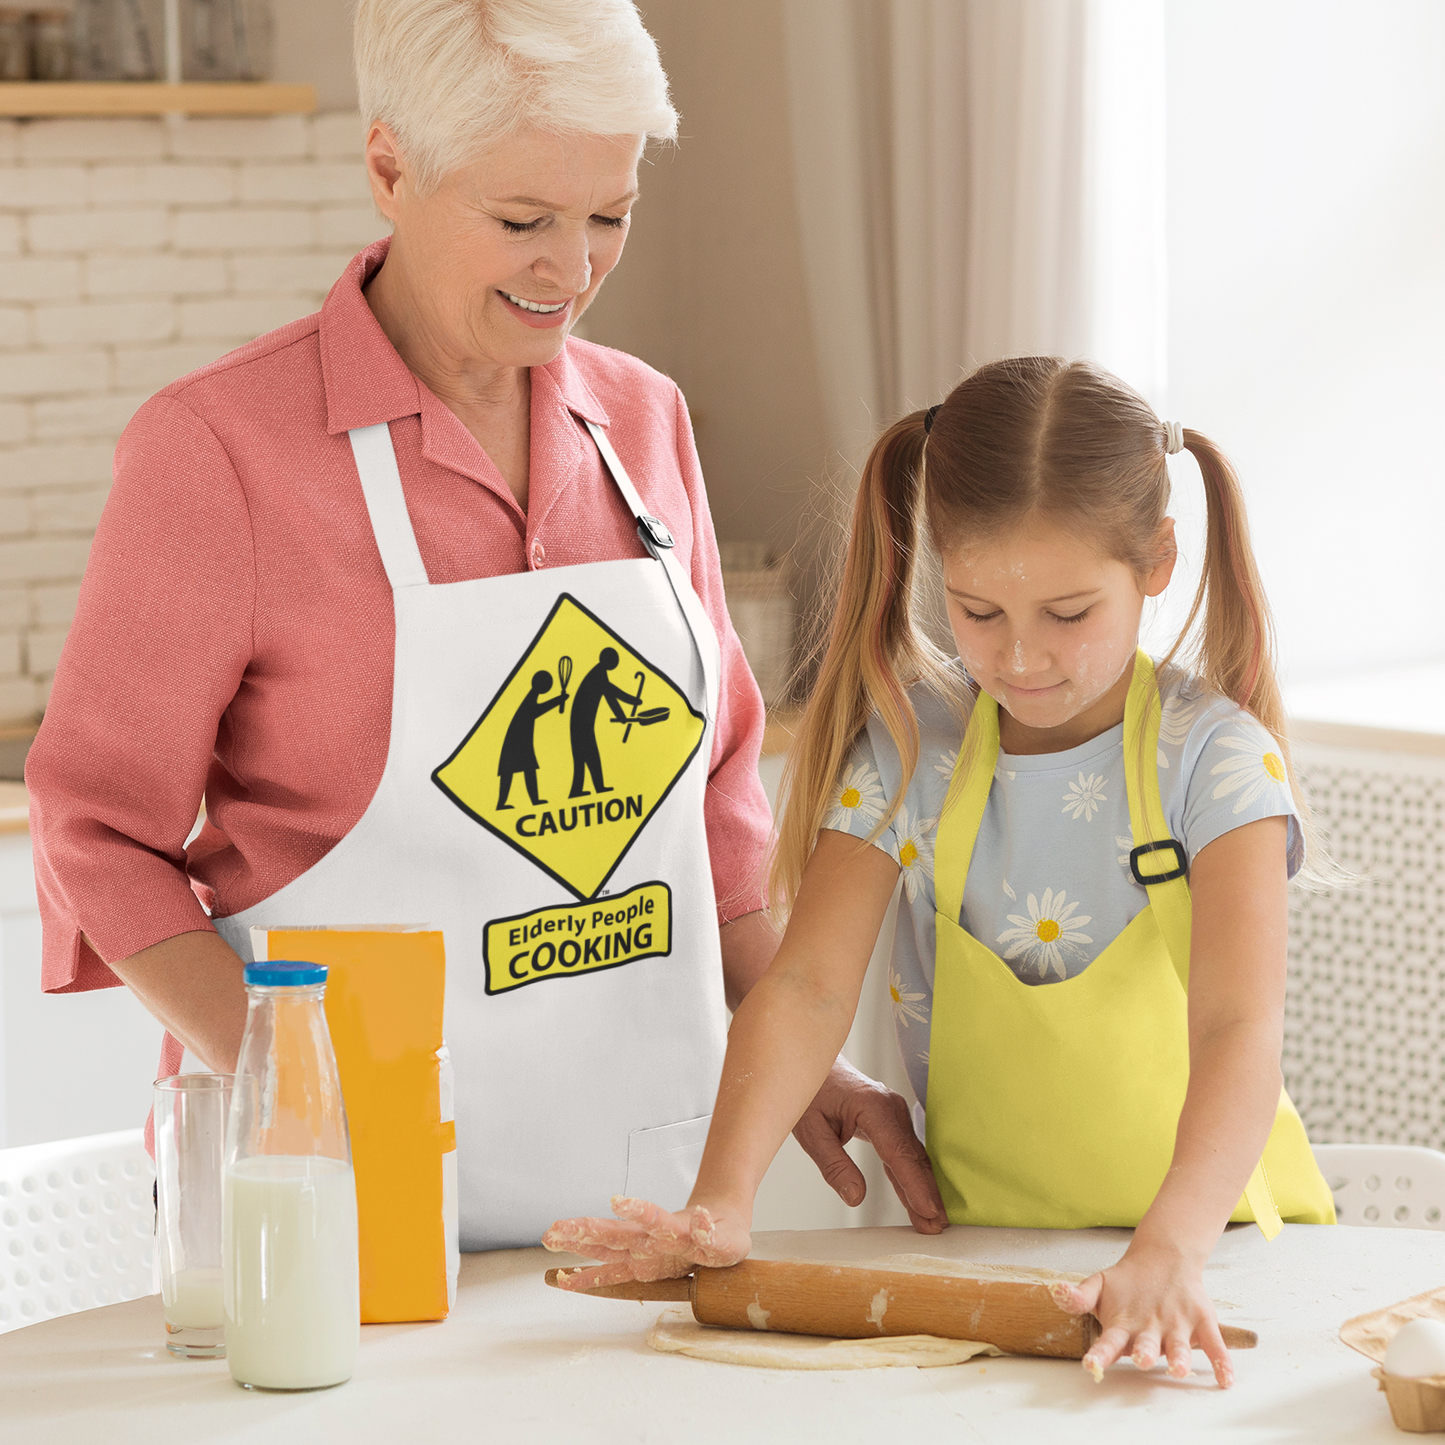 CAUTION: Elderly People COOKING Apron